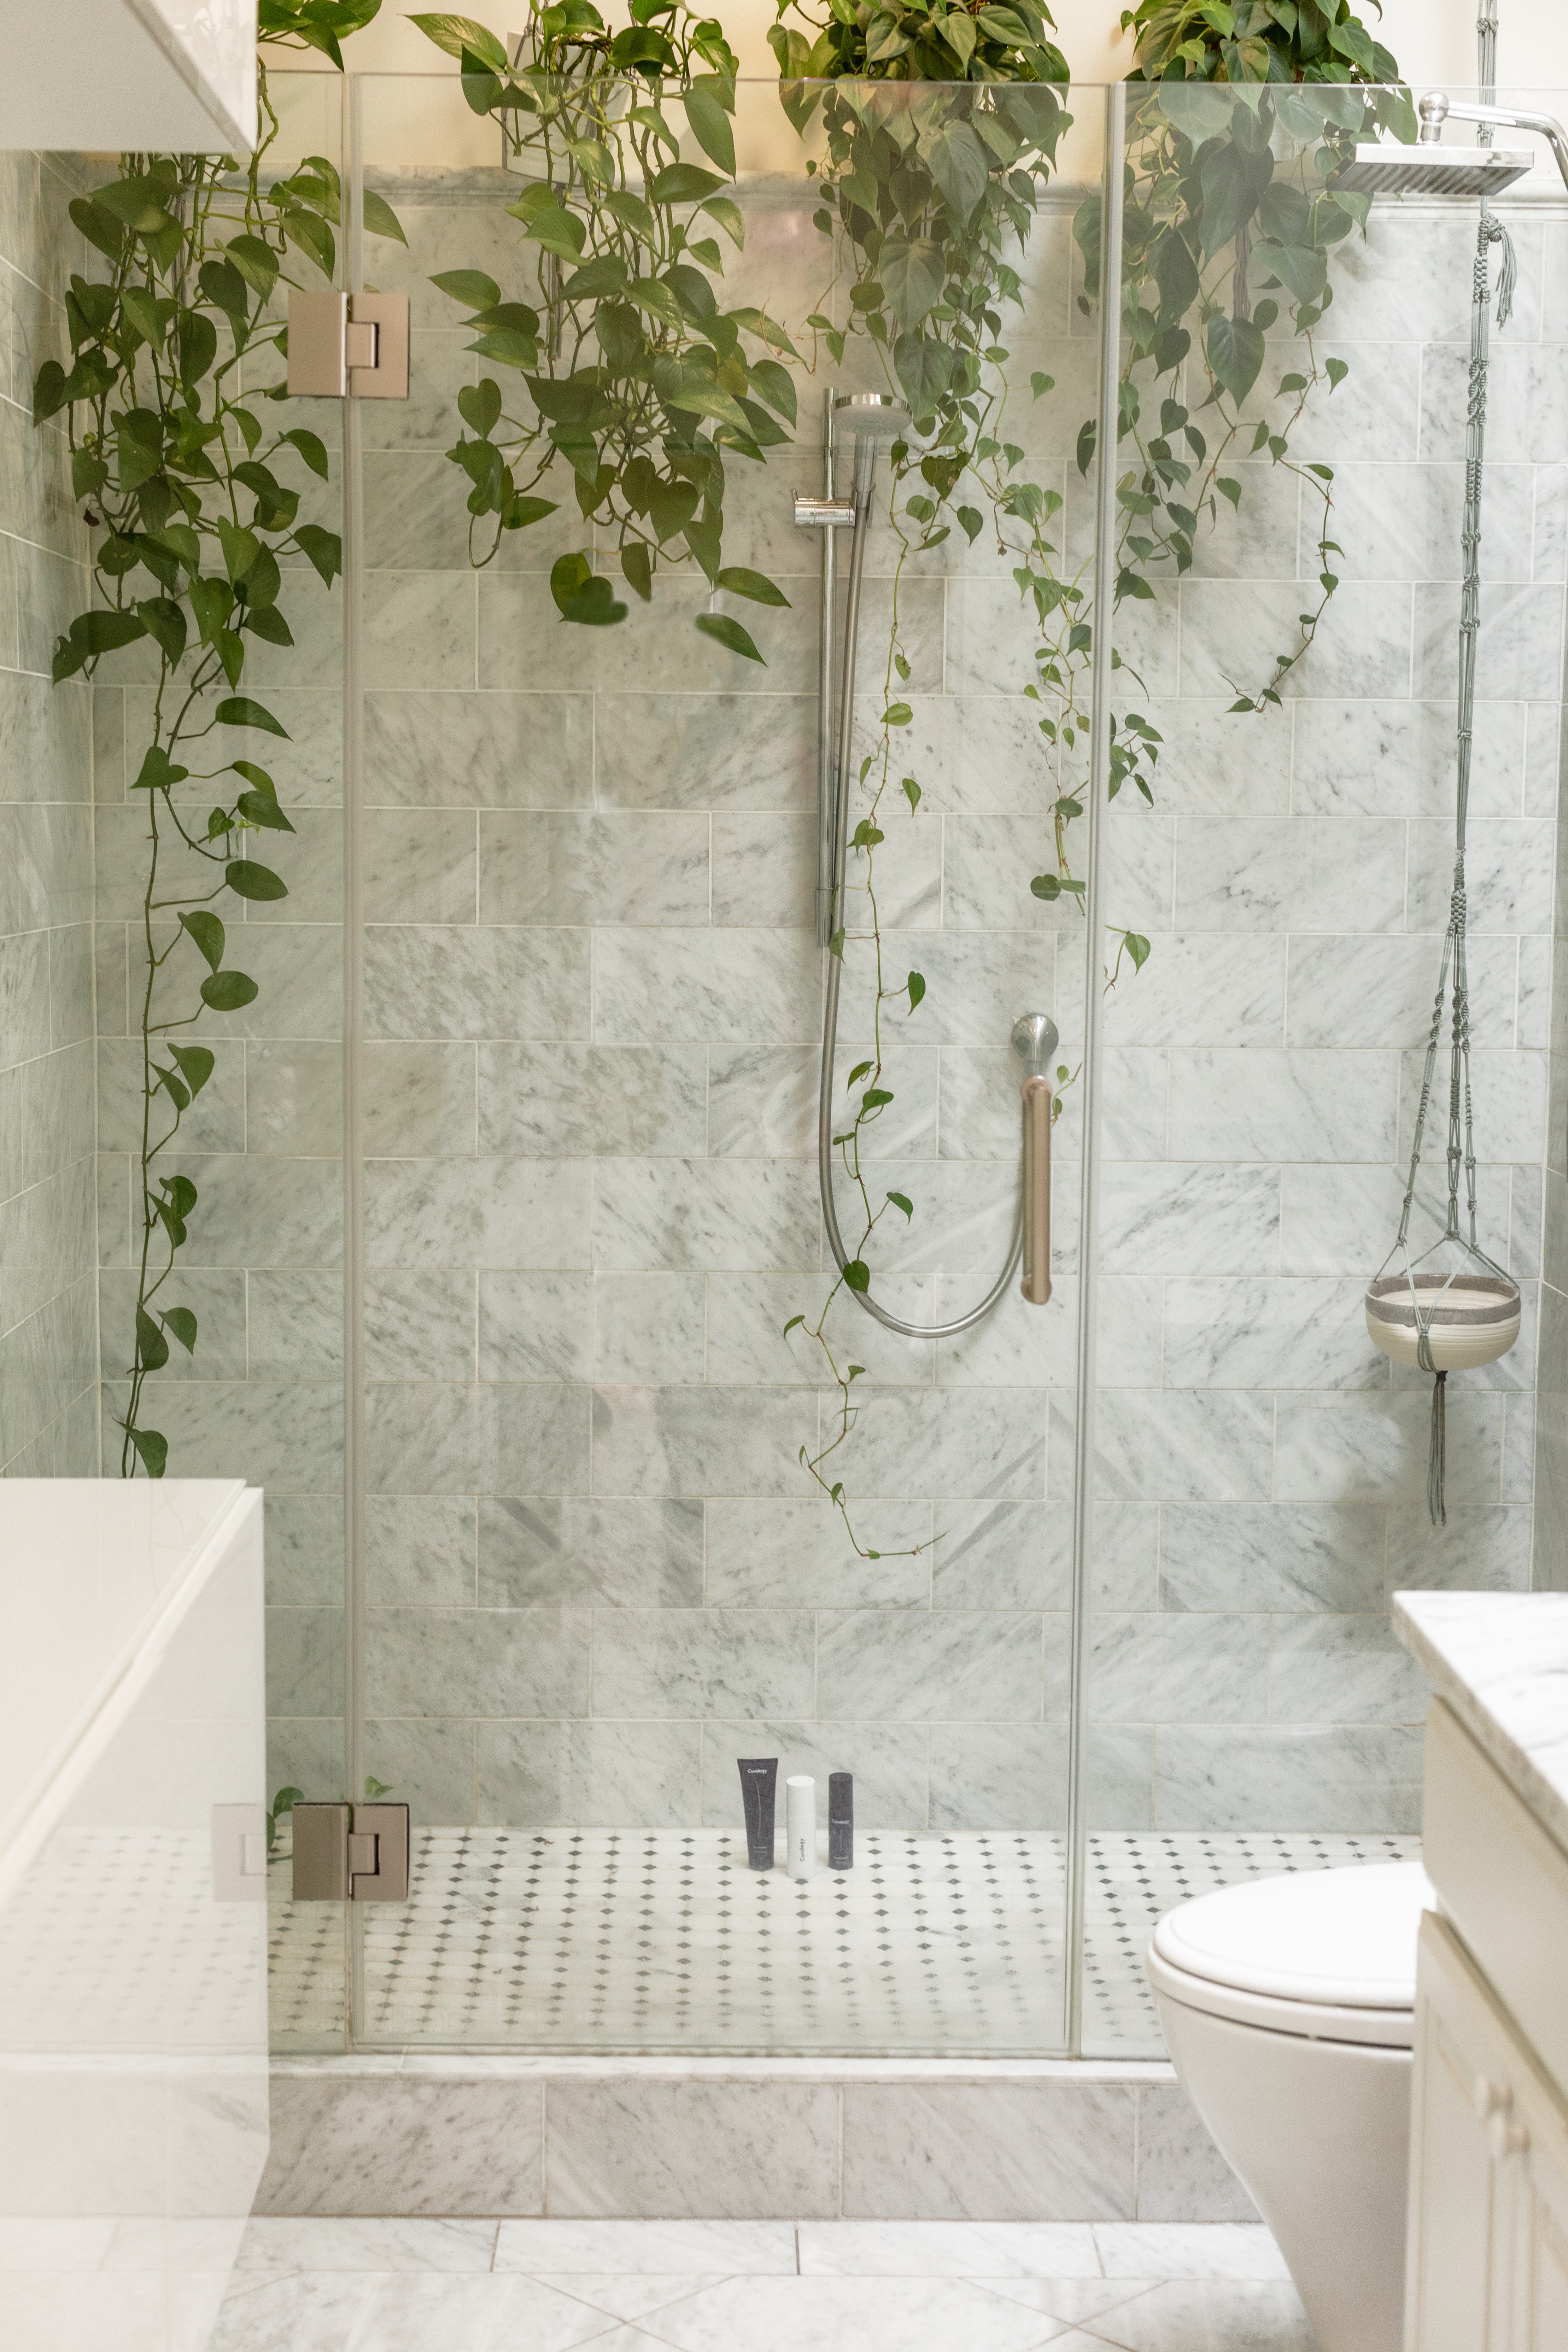 Bathroom Renovation On A Budget The 30 000 Challenge Thought Catalog